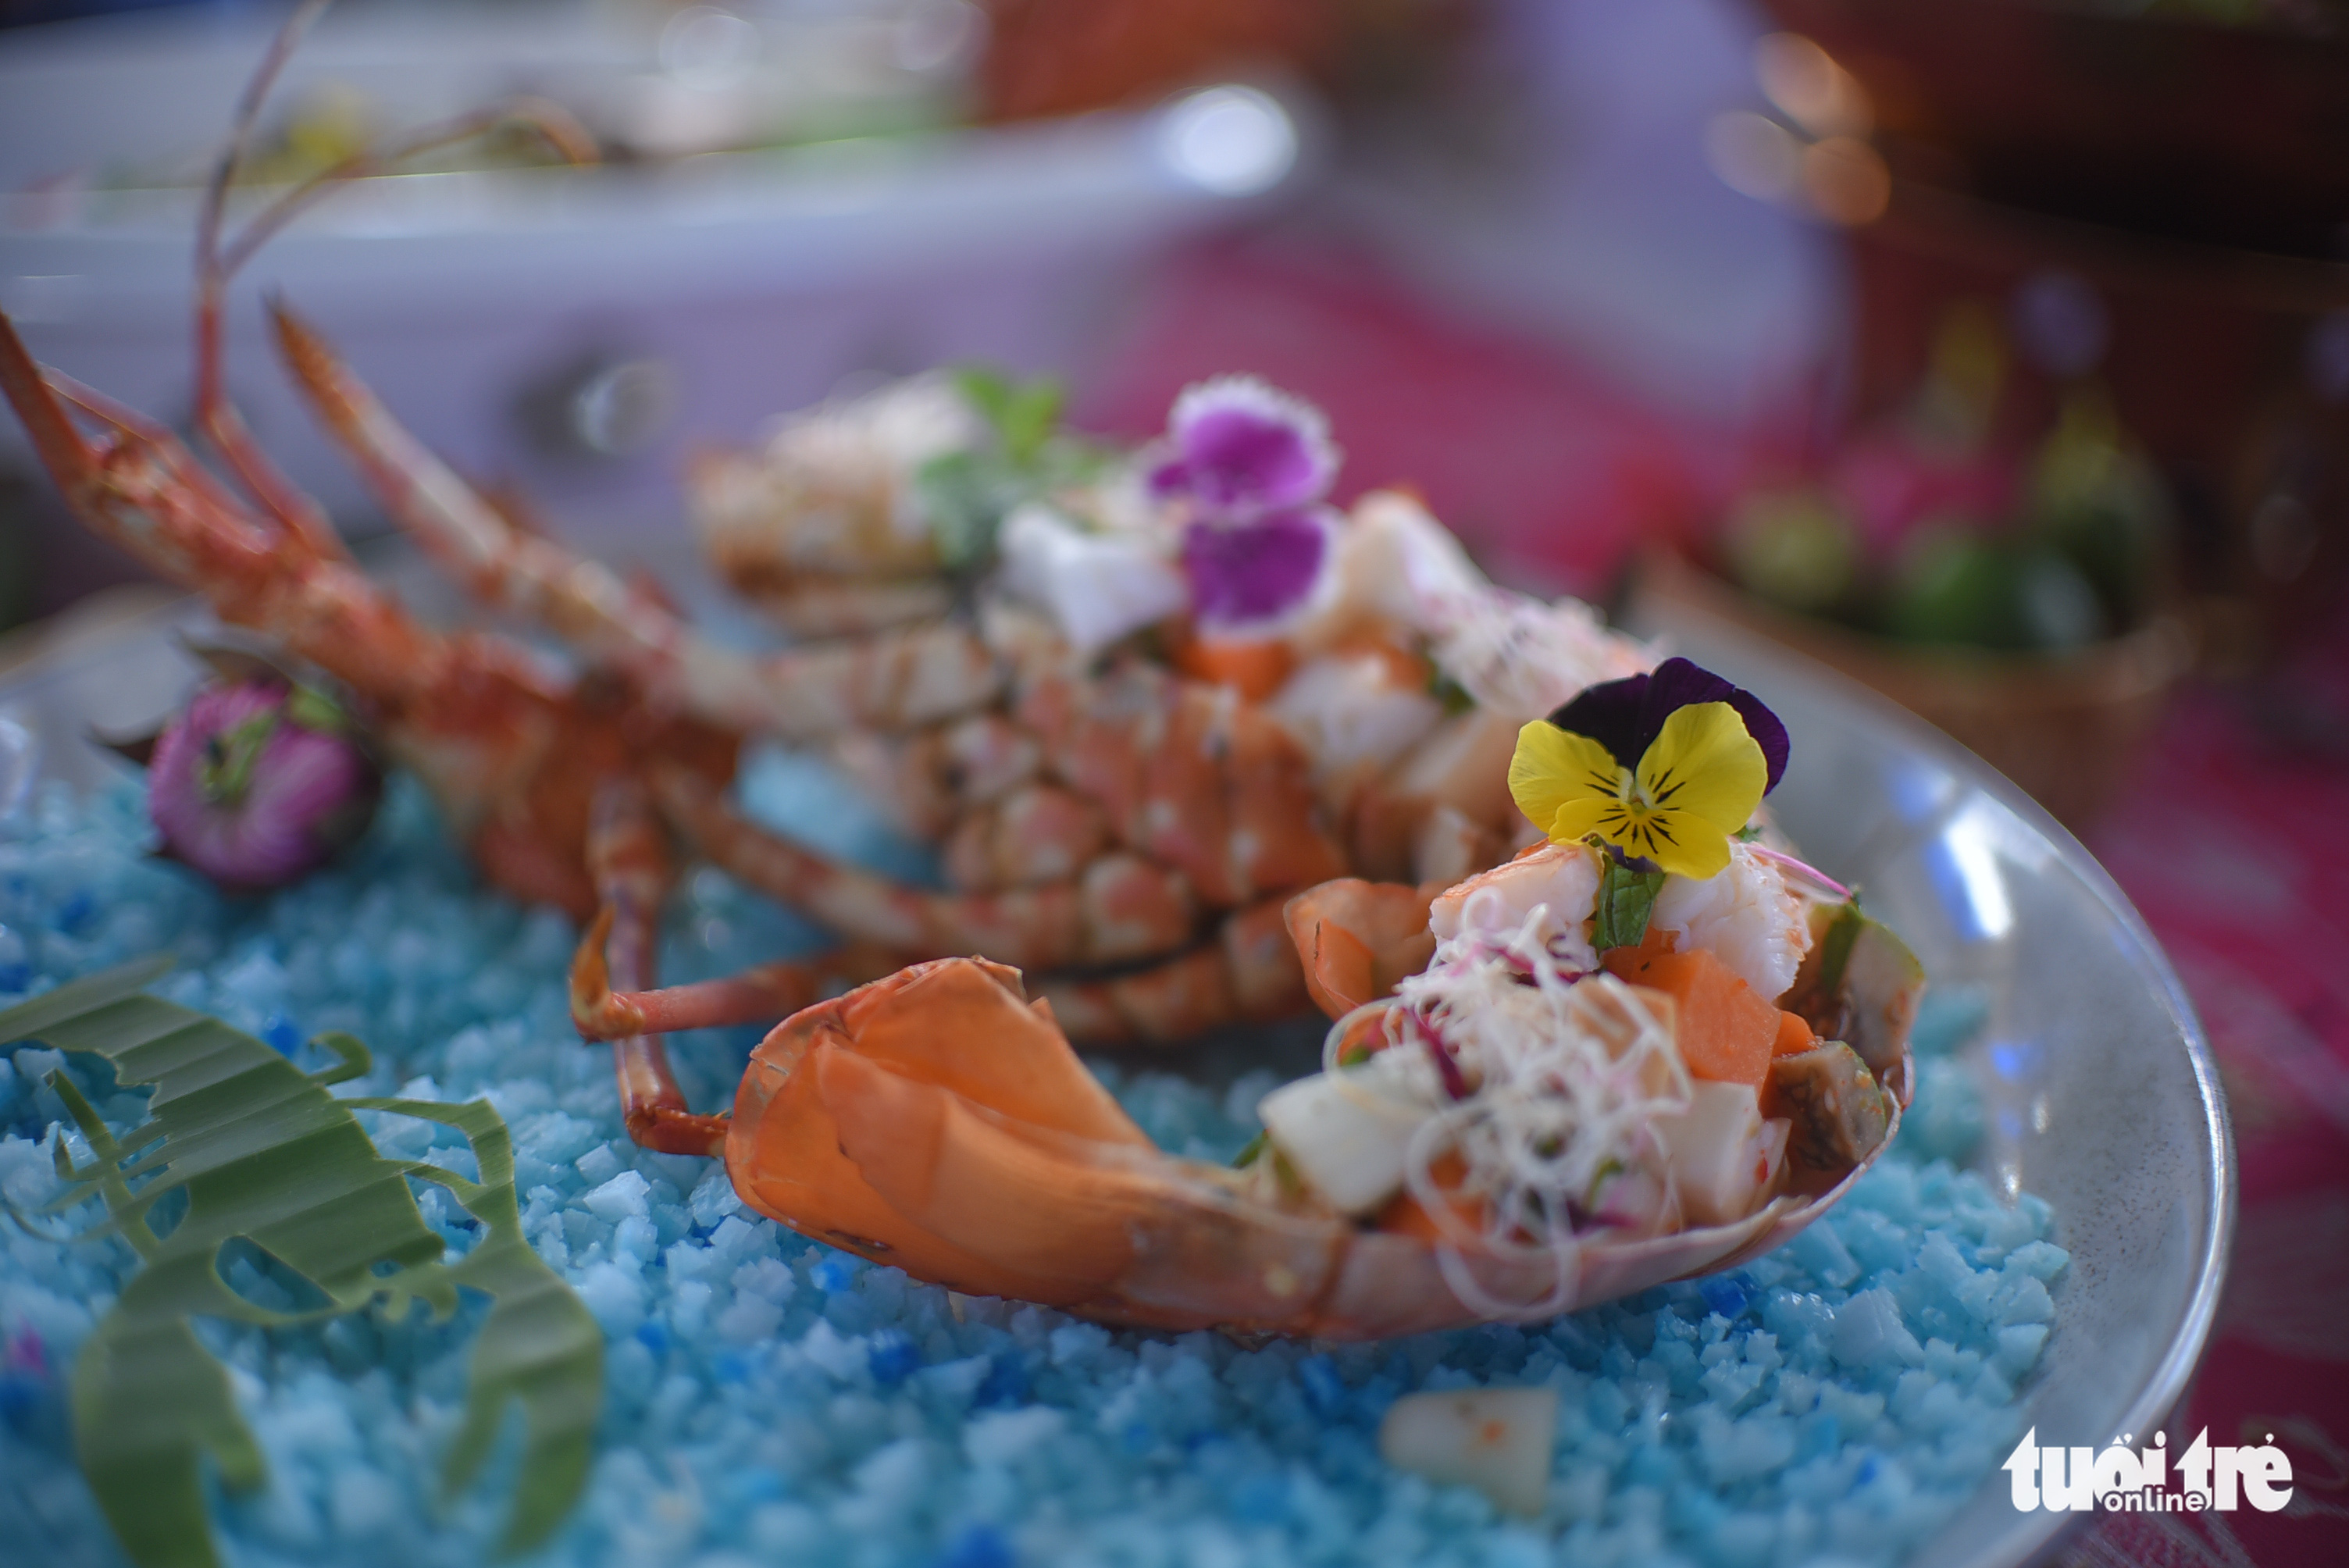 A lobster dish on display at a culinary contest in Phu Yen Province, Vietnam, July 31, 2022. Photo: Lam Thien / Tuoi Tre